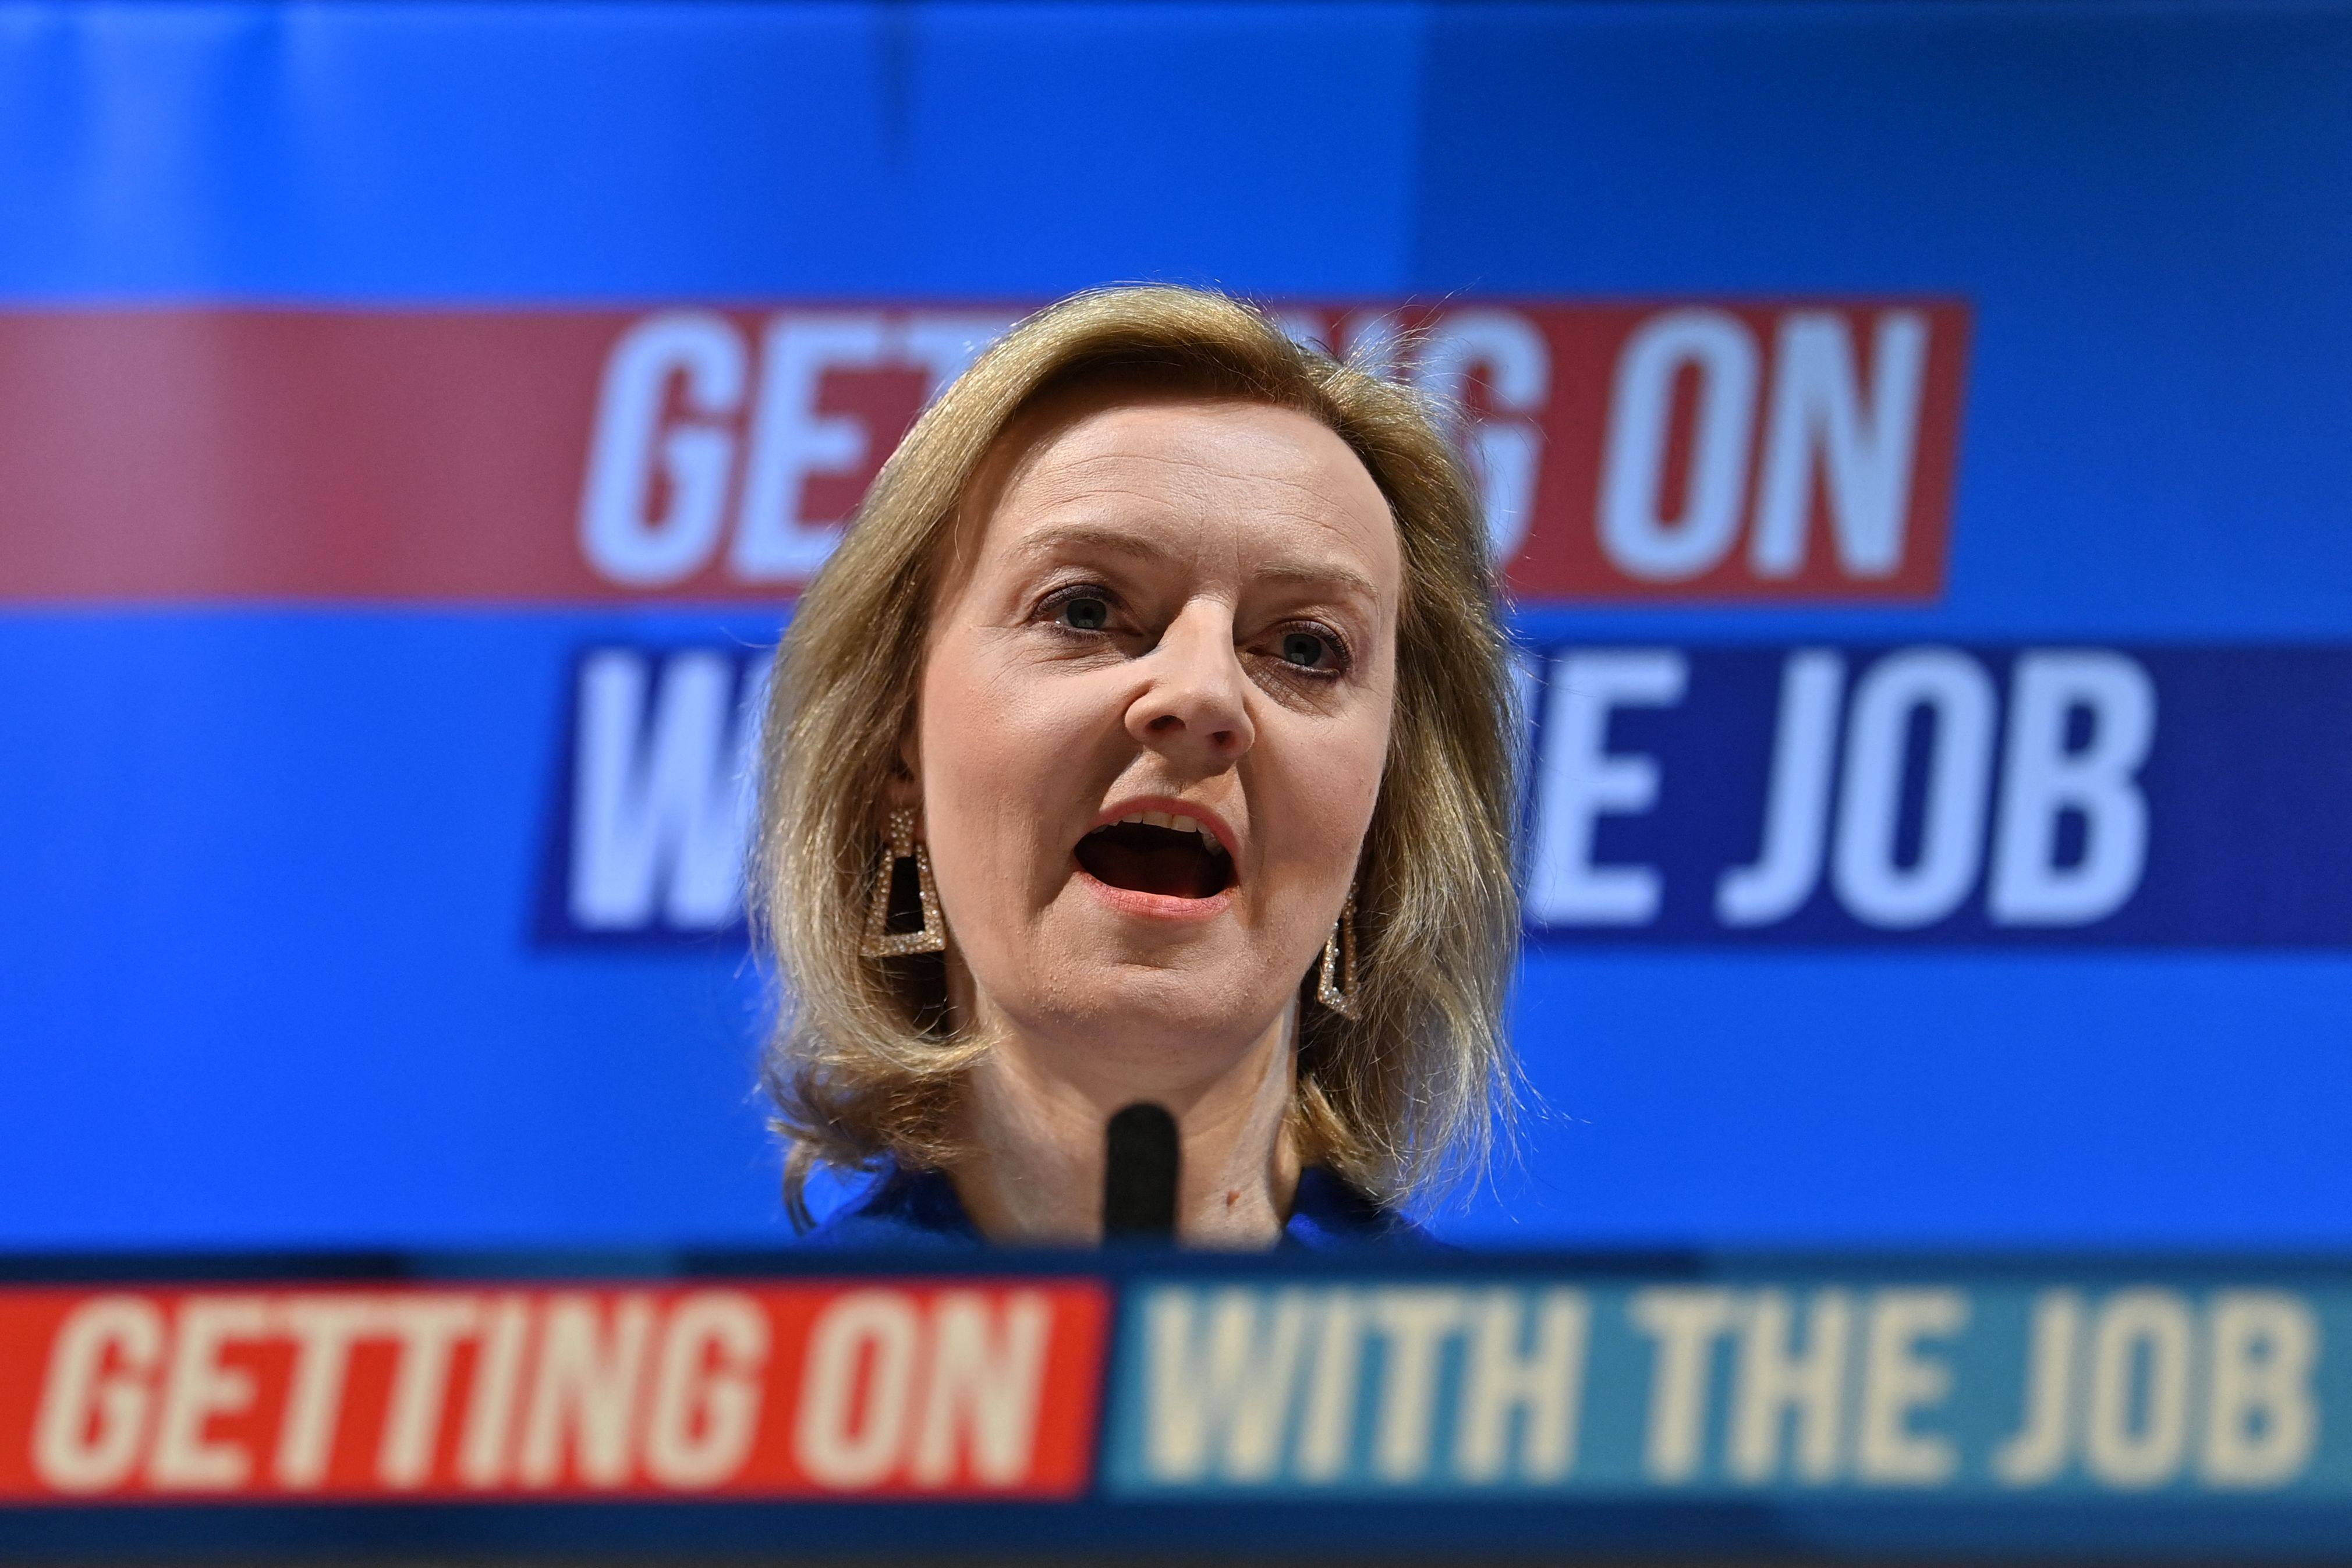 Liz Truss speaks as foreign secretary during the Conservative Party Spring Conference at Blackpool Winter Gardens in Blackpool, northwest England on March 19. Before she became foreign secretary, she was the secretary of state for international trade, the president of the board of trade, and the minister for women and equalities, all at the same time. Photo: AFP